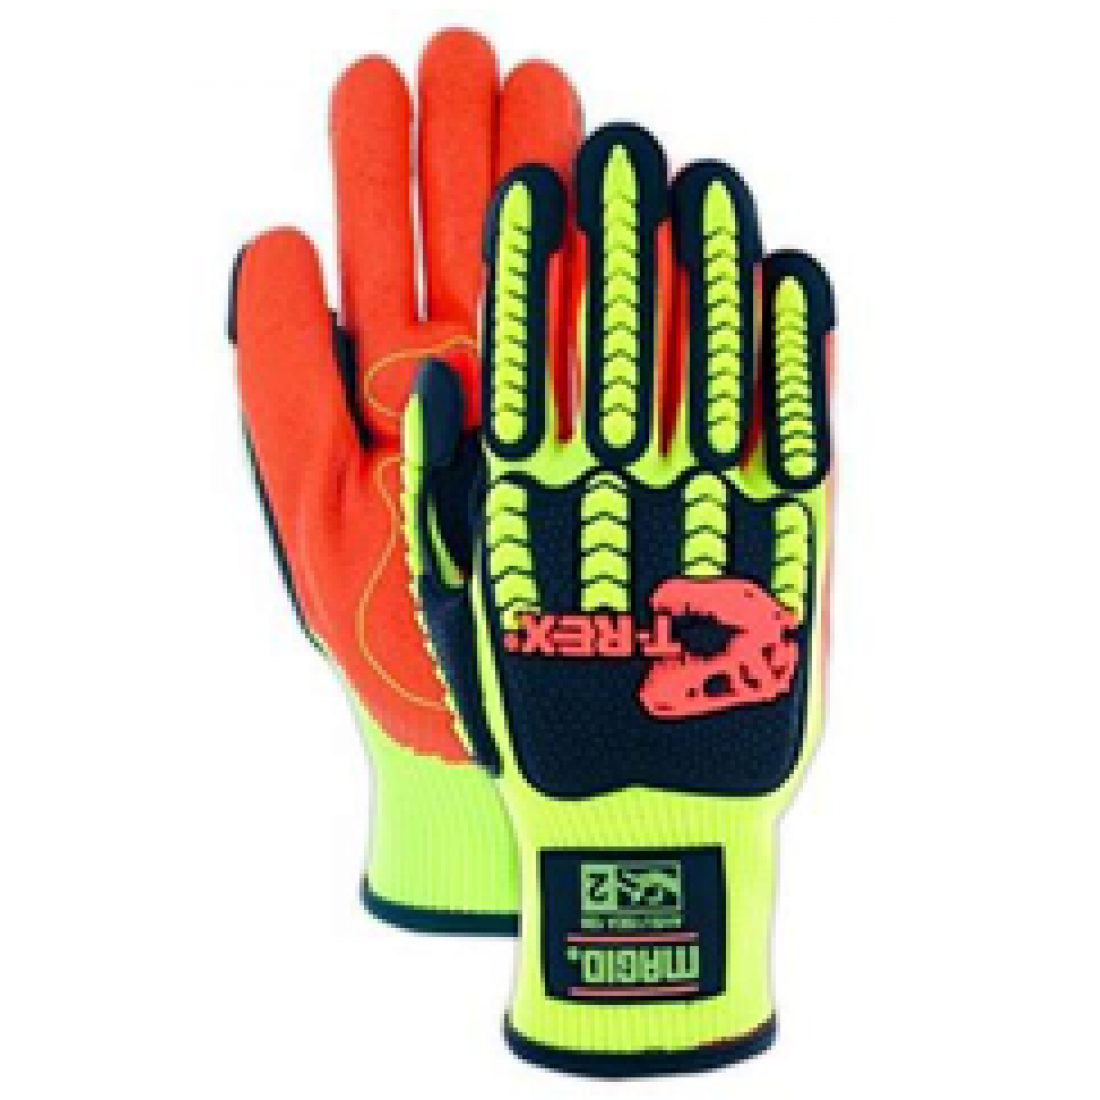 Cut Level A1 Synthetic Palm Impact Glove